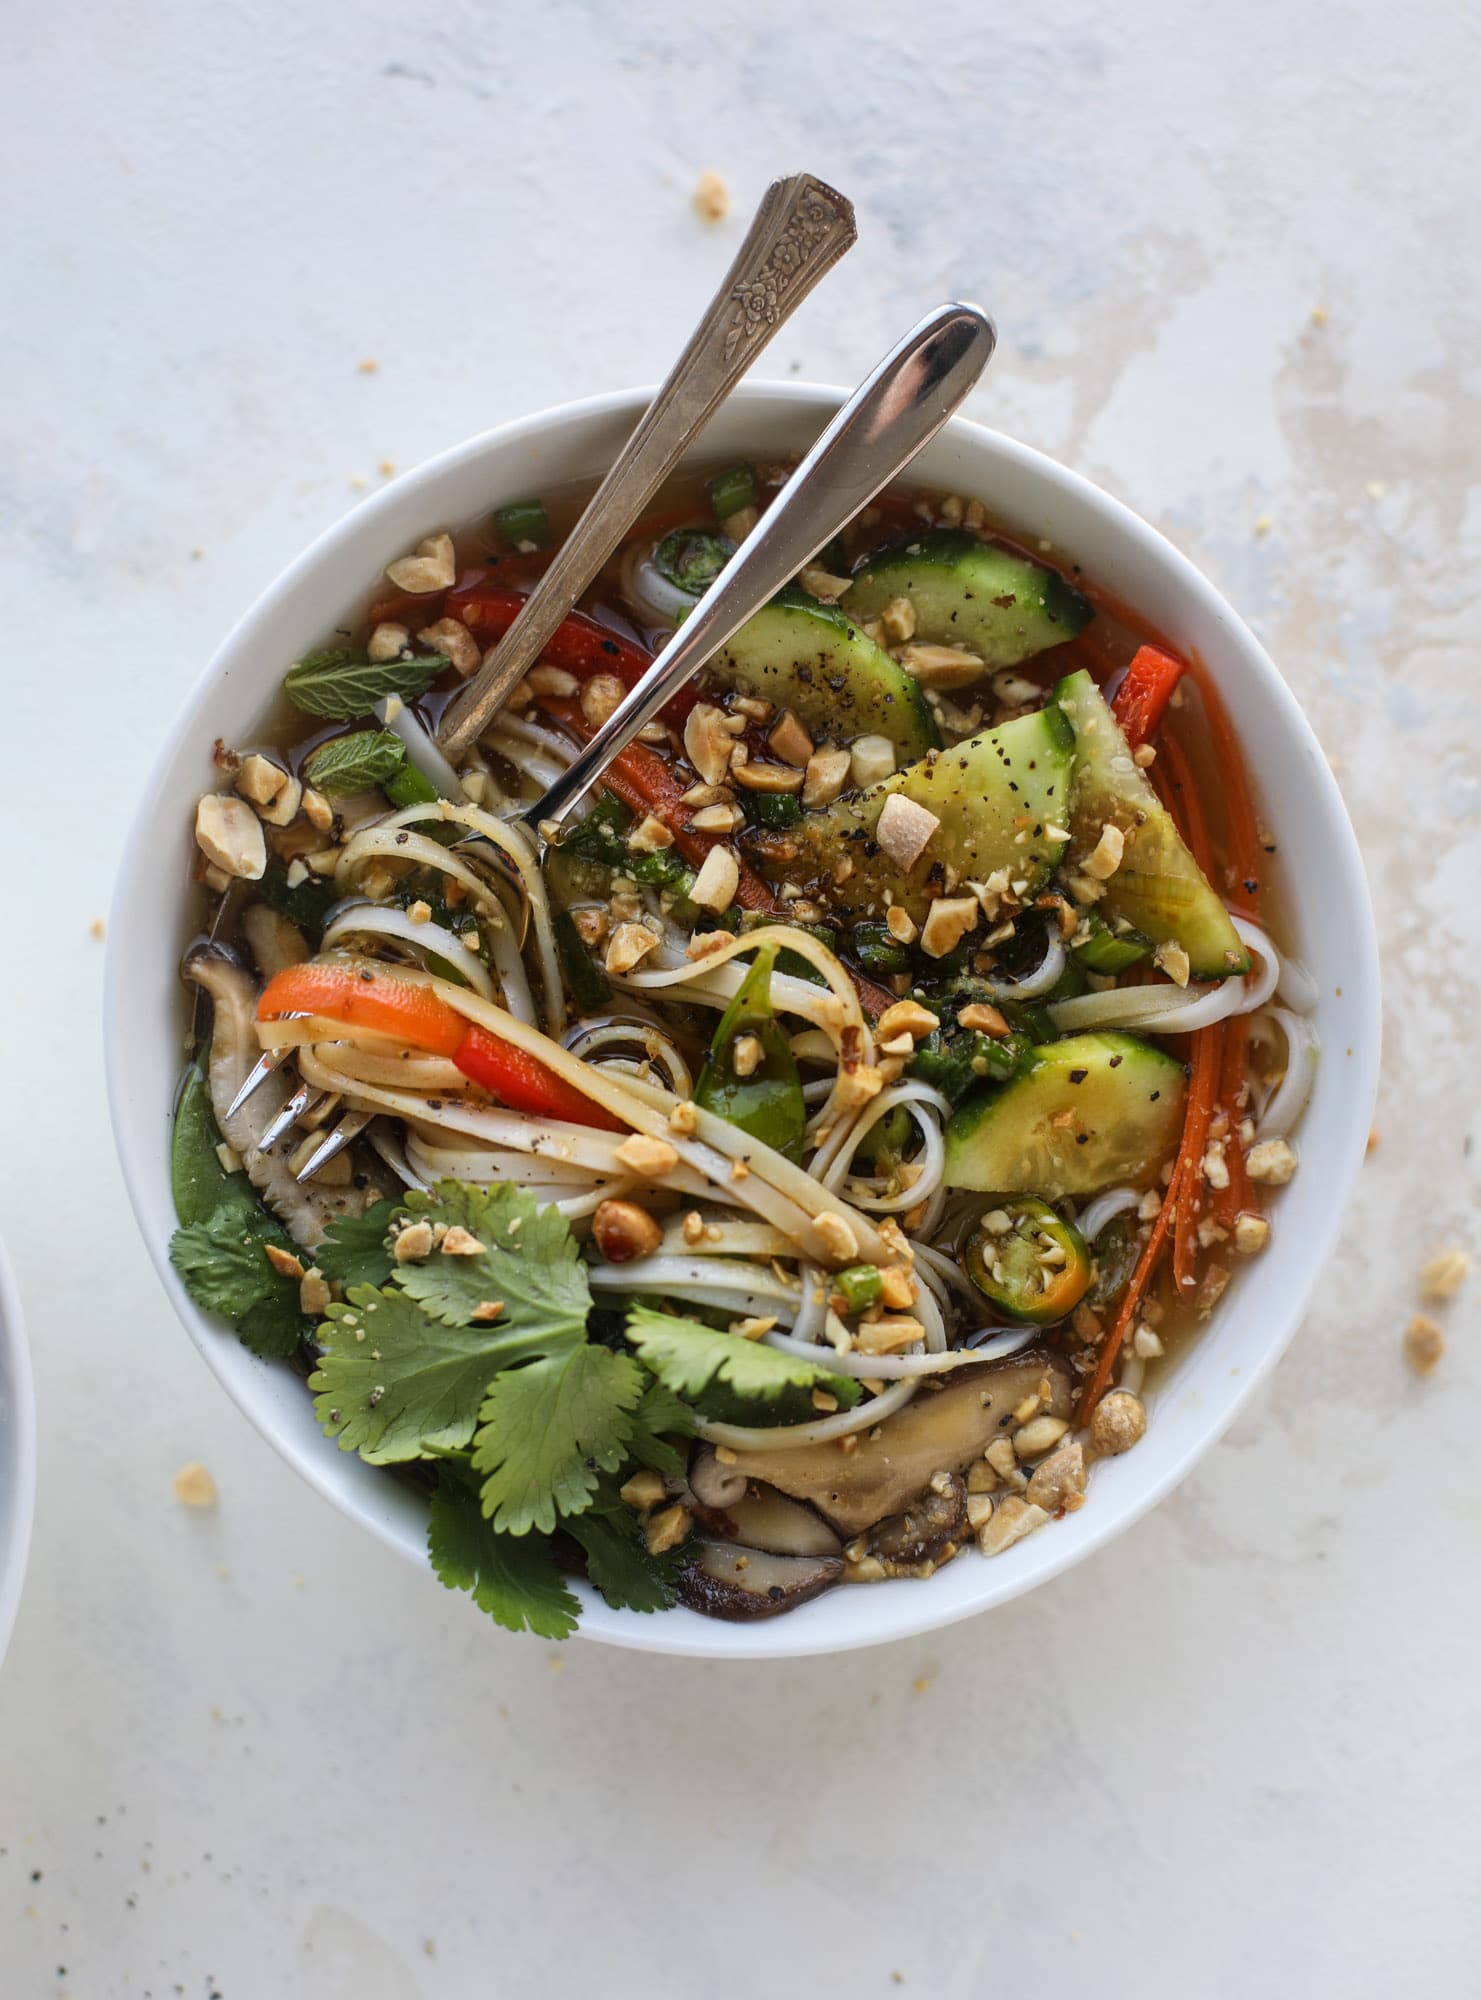 Ginger scallion noodle bowls are a flavorful, comforting vegetarian meal that can be customized to include any veggies you love! I howsweeteats.com #noodle #bowls